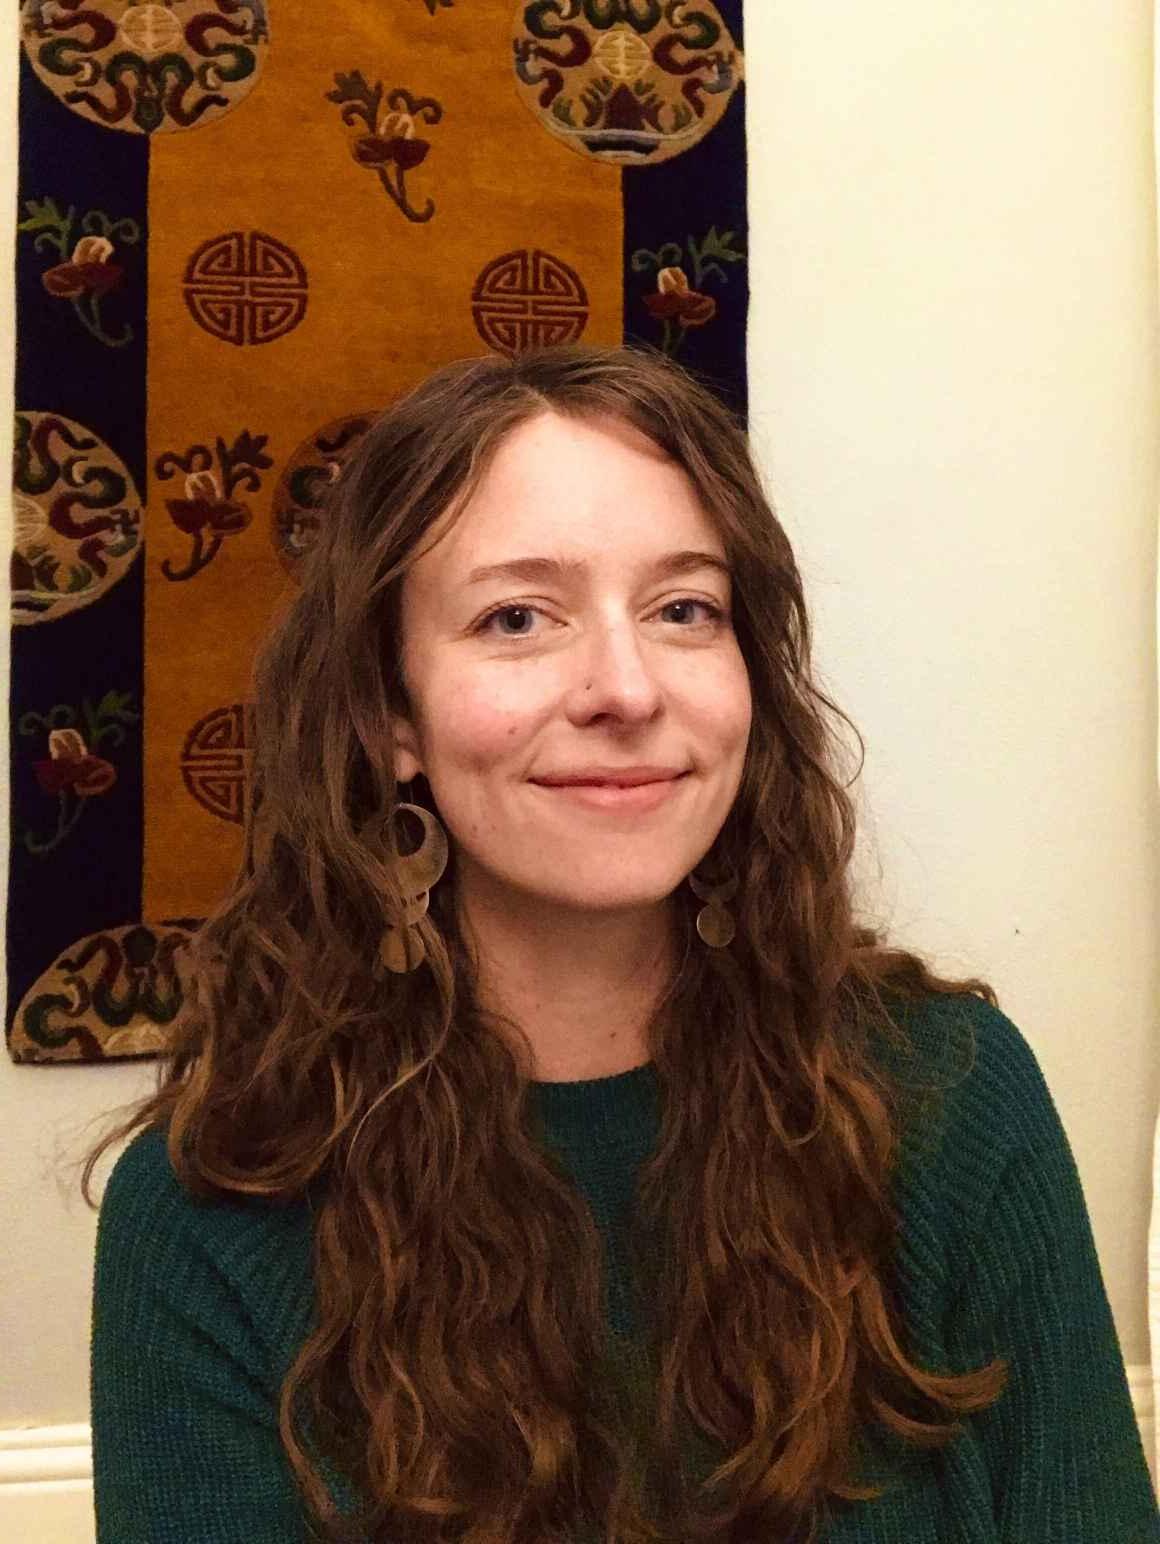 Kate Falkenhart, ACLU of Colorado operations manager, smiling, in front of light-colored wall with a brown and black tapestry hanging